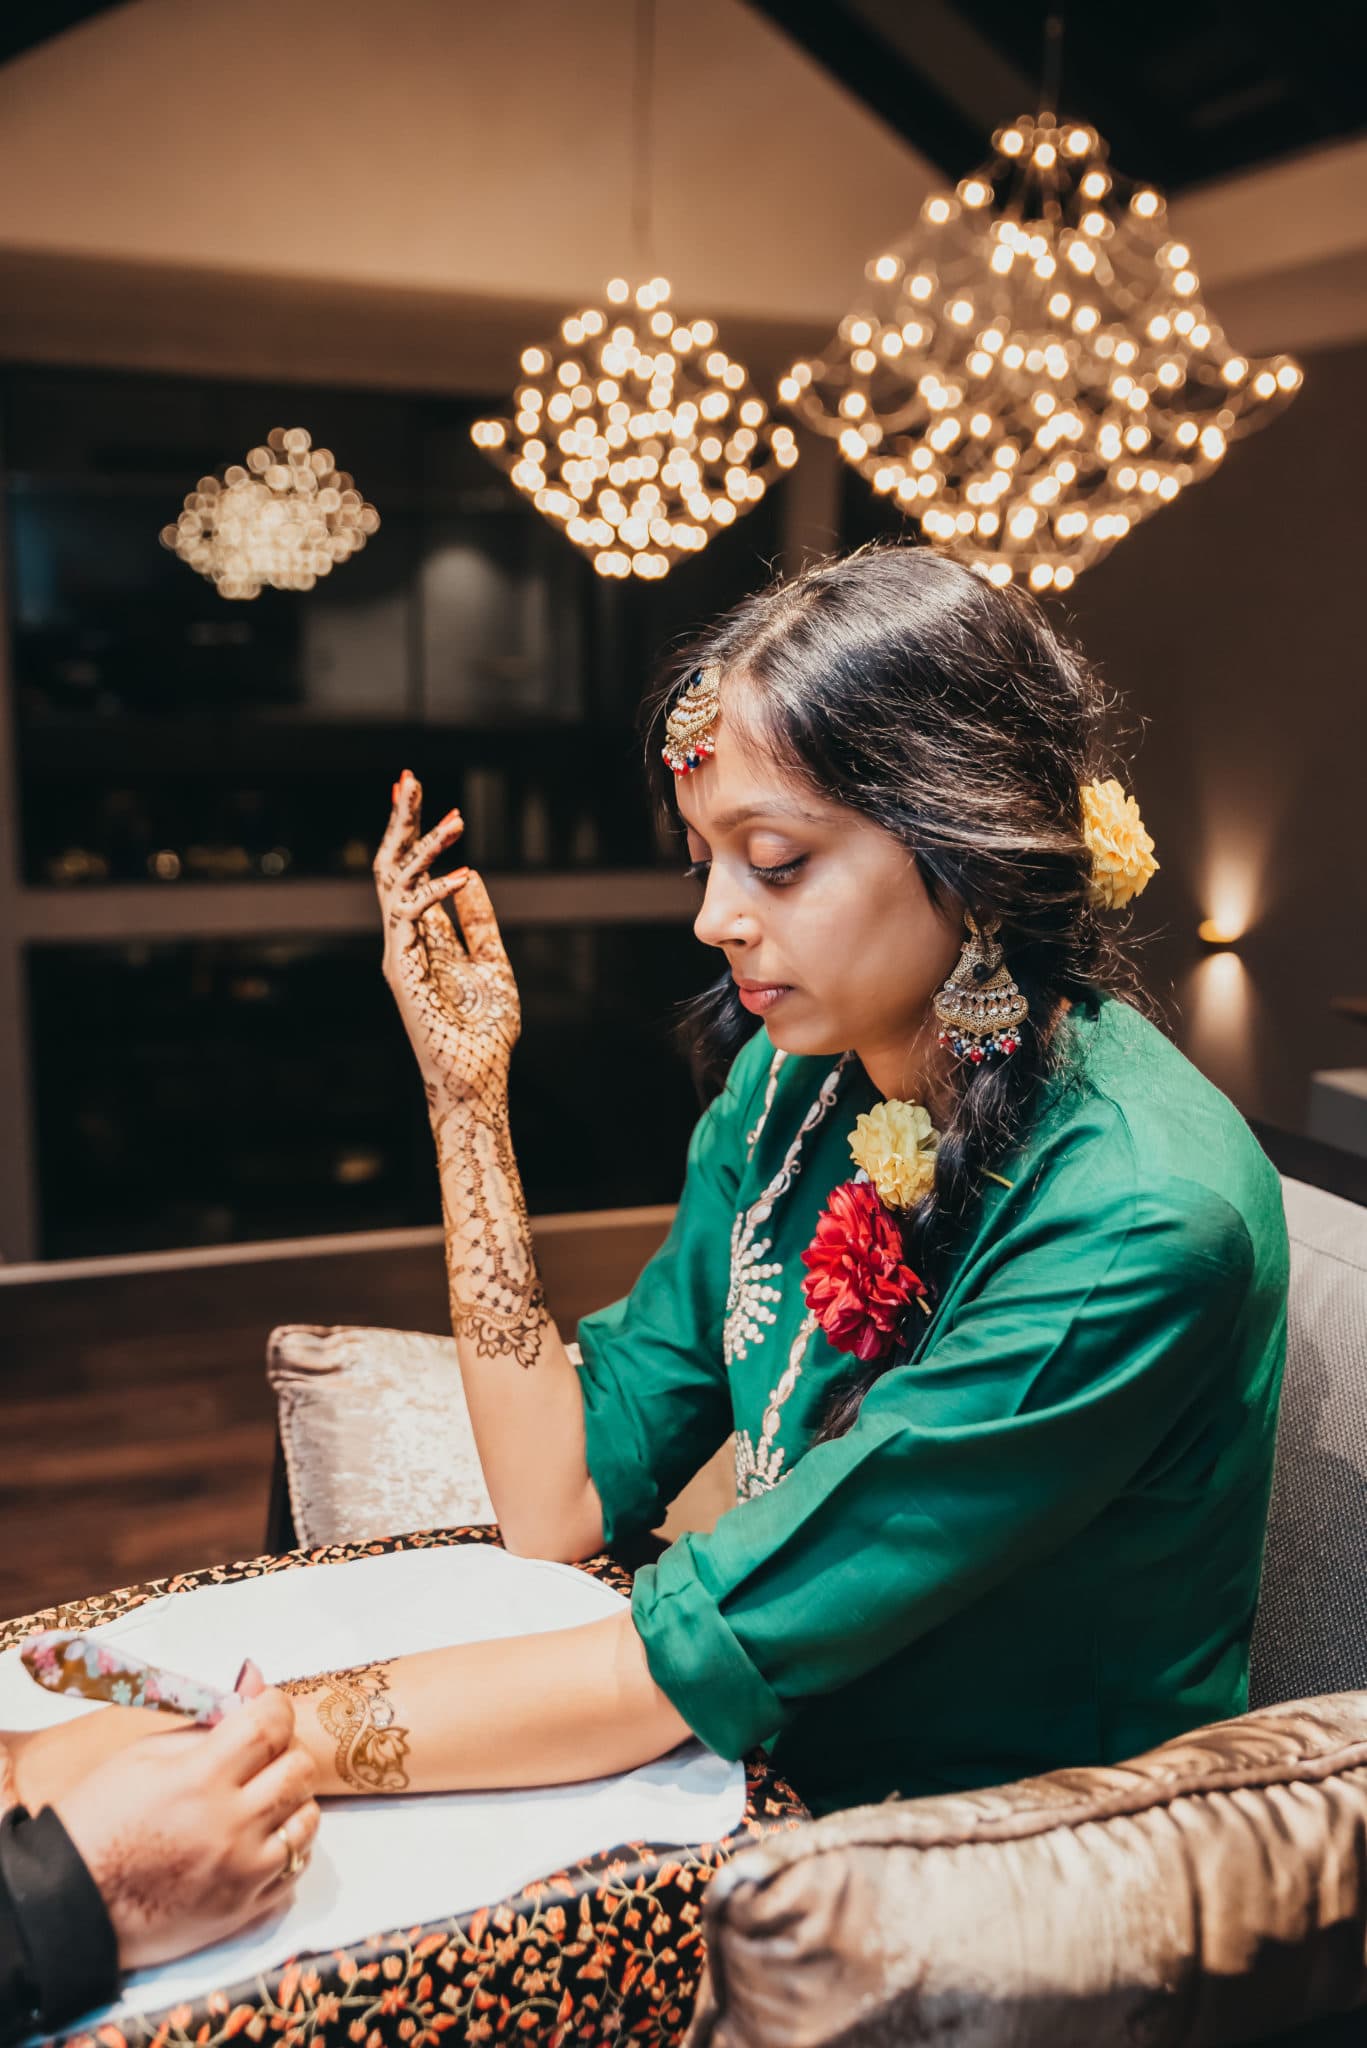 Mehndi ceremony in an Indian wedding ceremony , Barnet, Potters Bar London